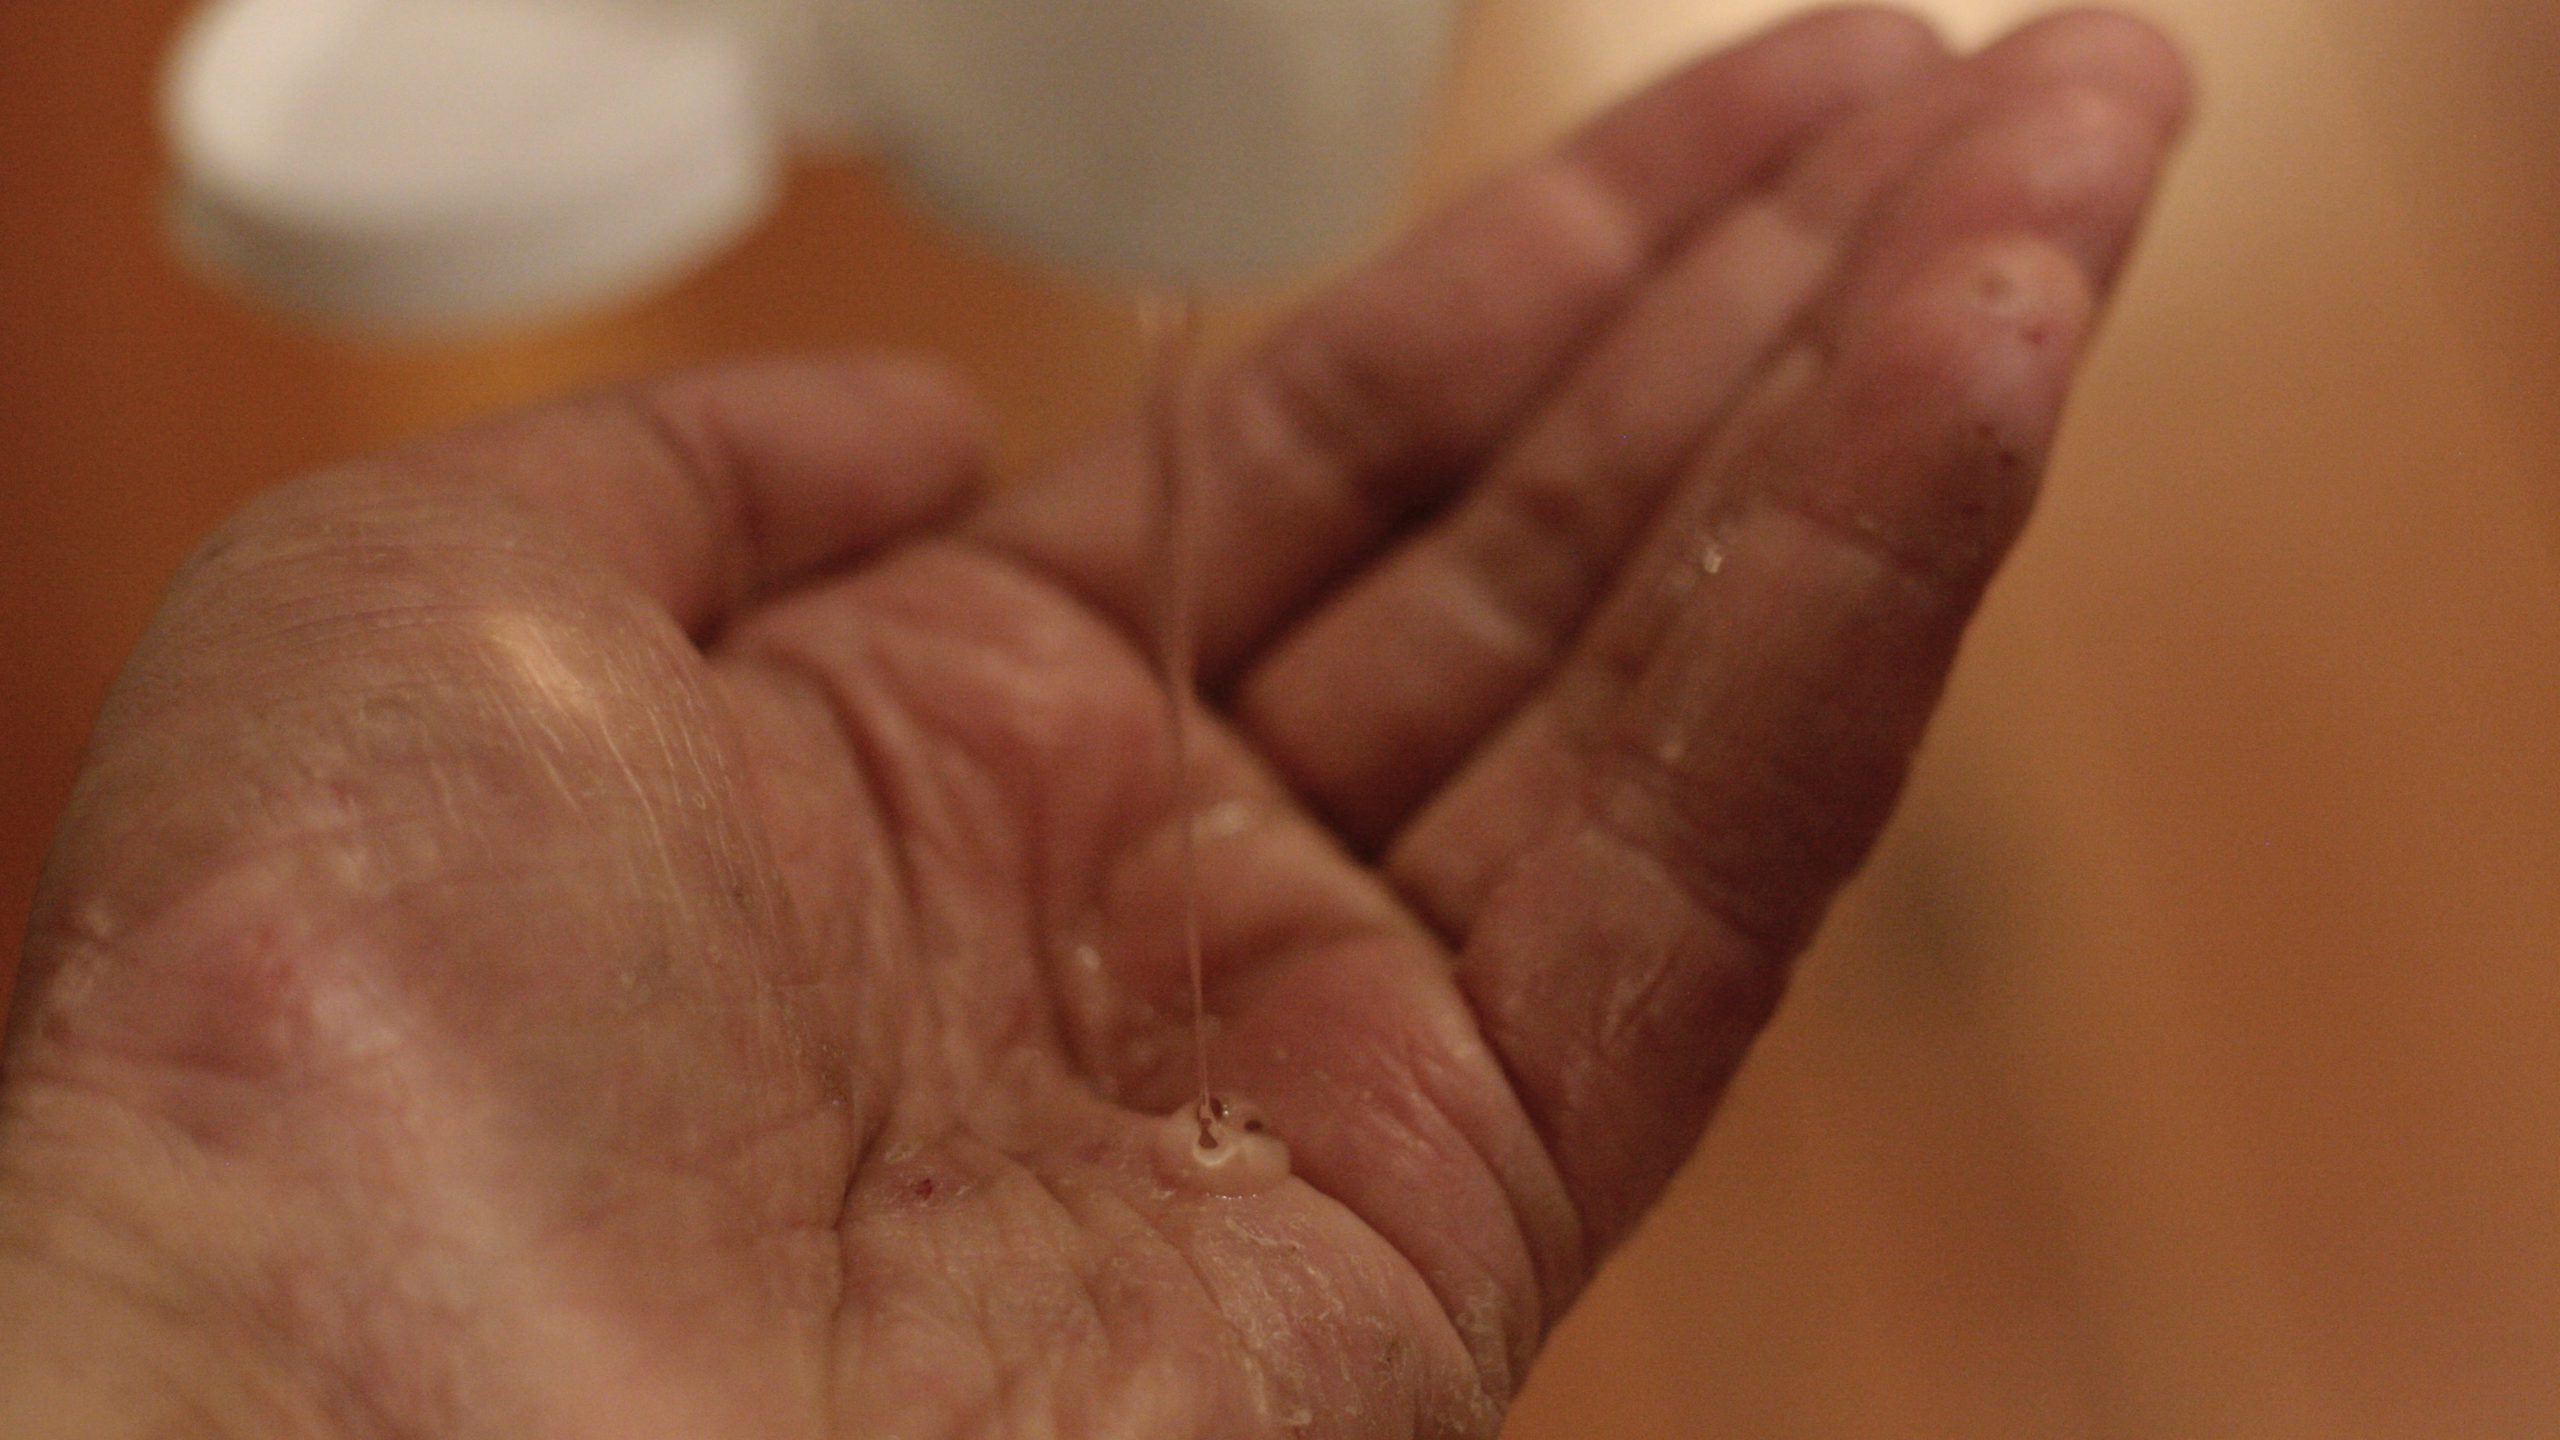 Hand sanitizer being pored on hands that show signs of eczema.